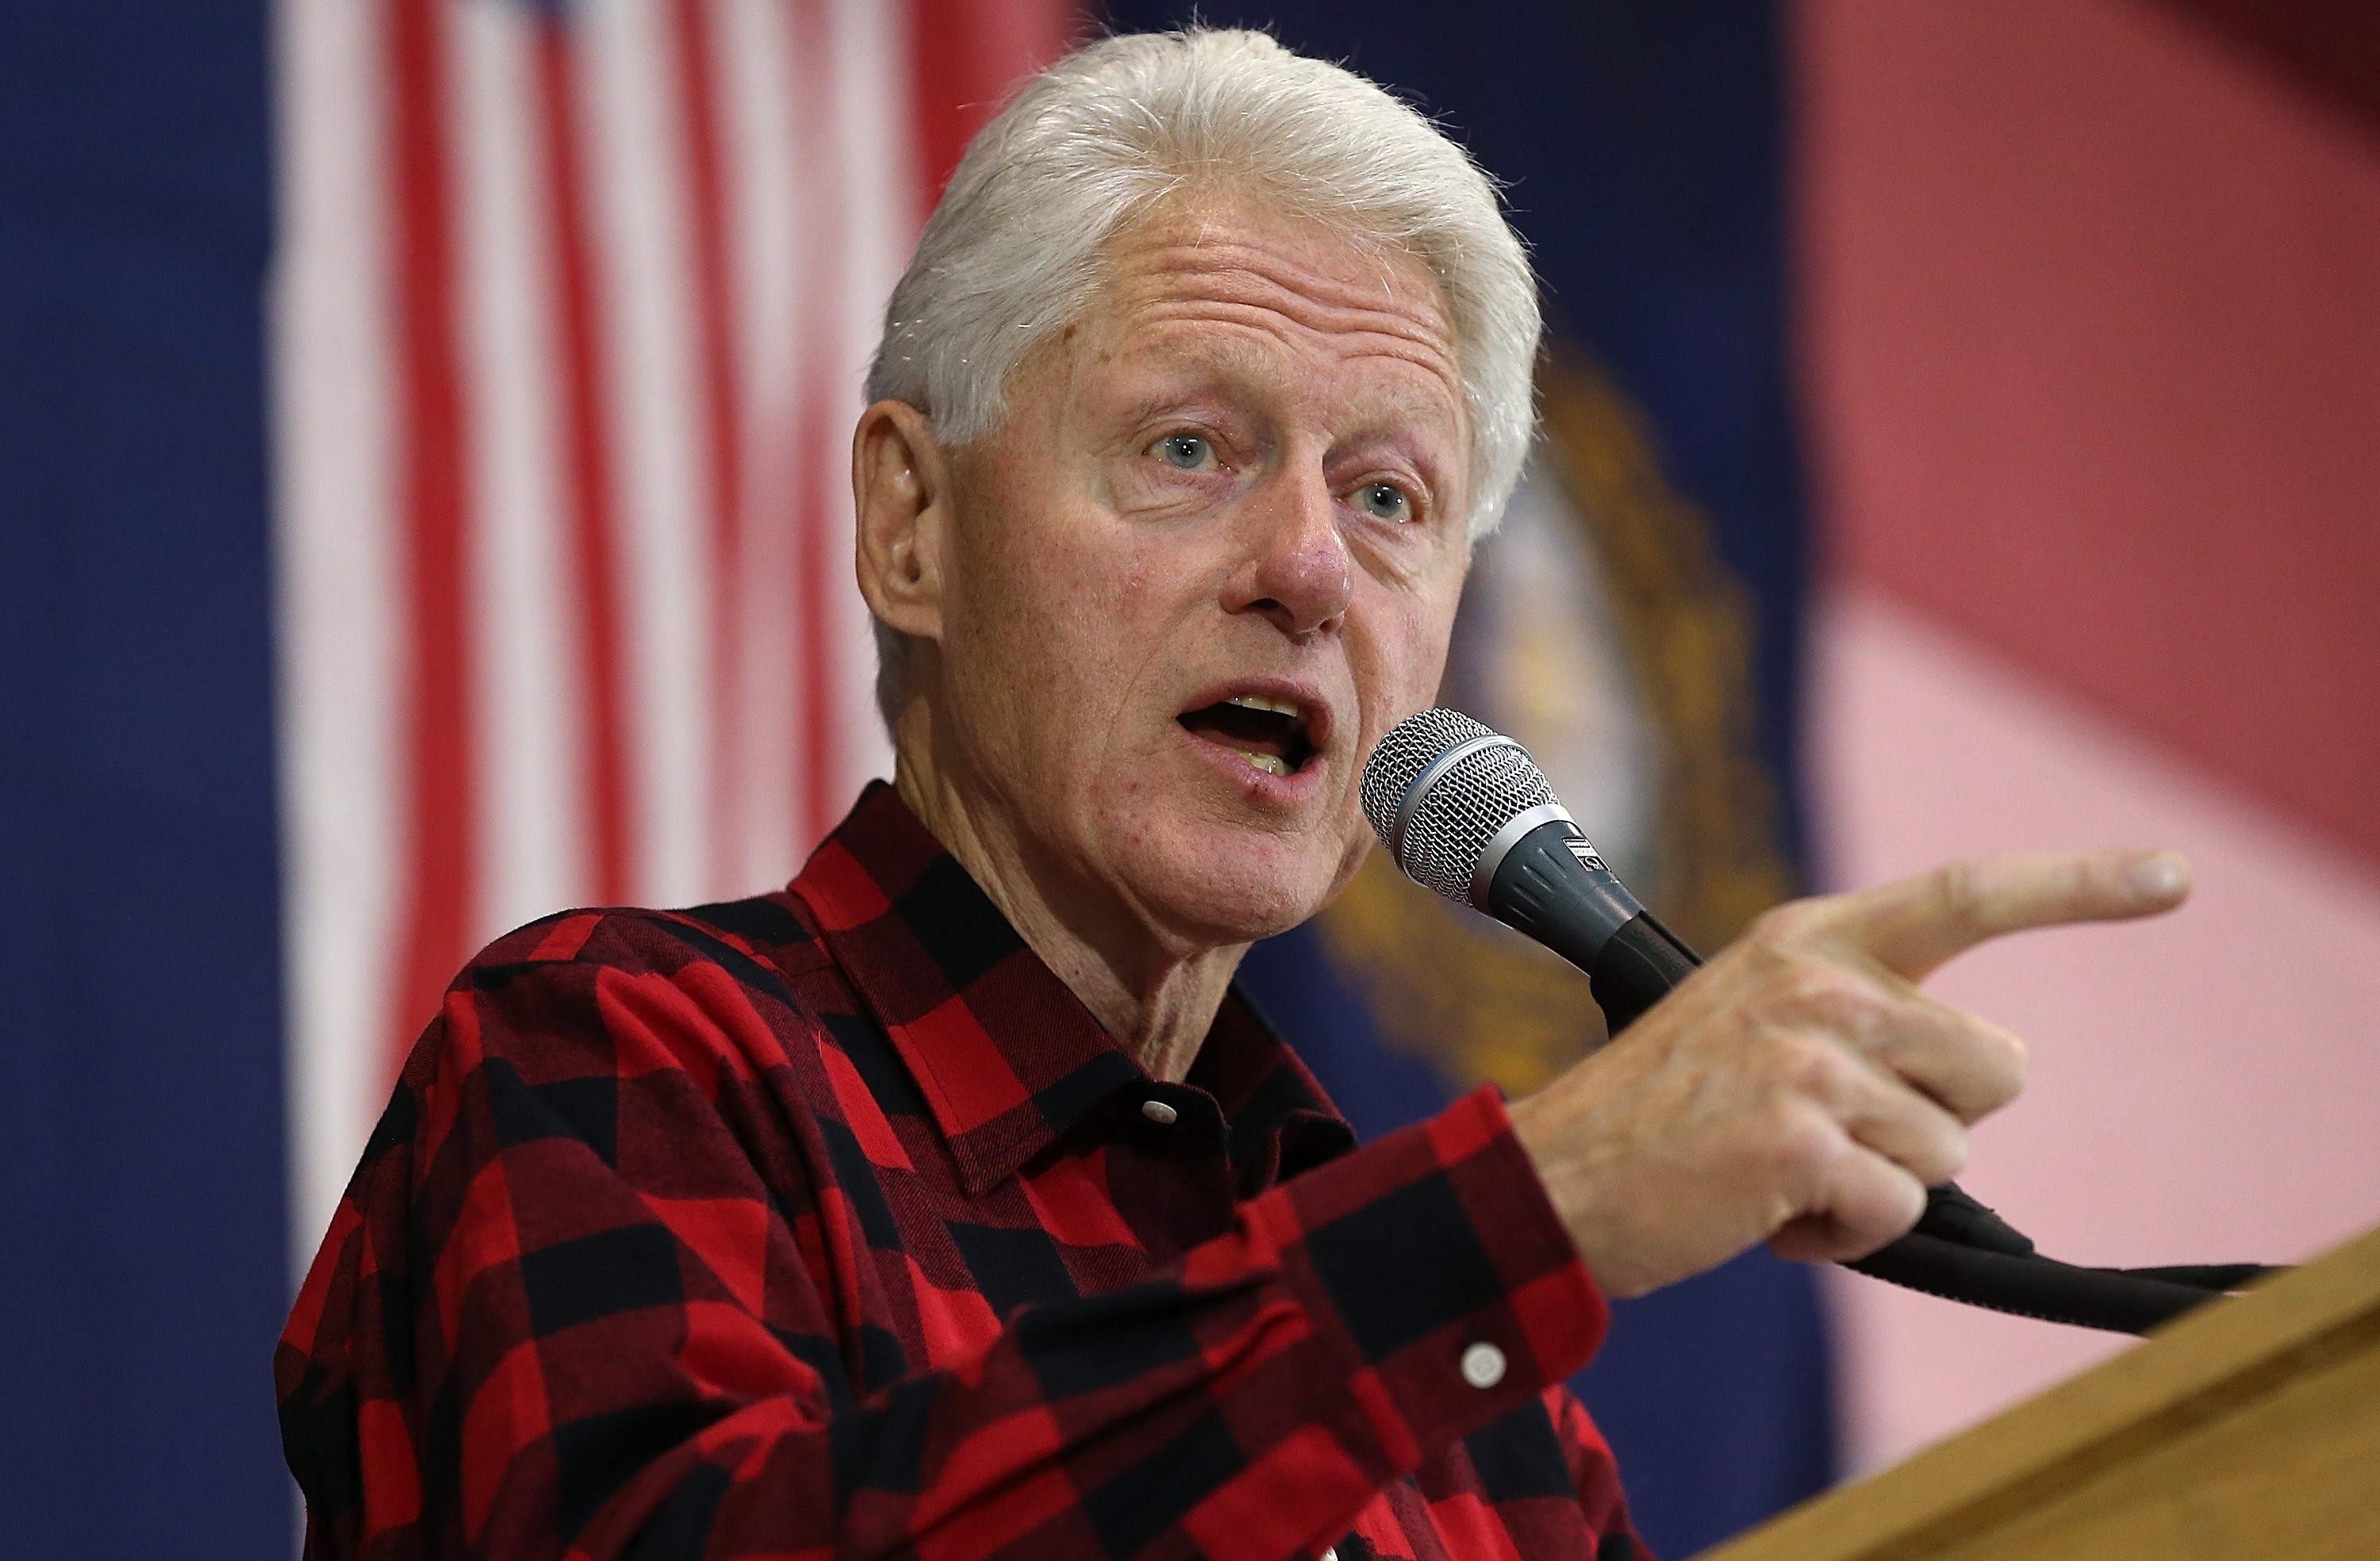 Bill Stumping for Hillary Clinton Sometimes I Wish We Werent Married – NBC News